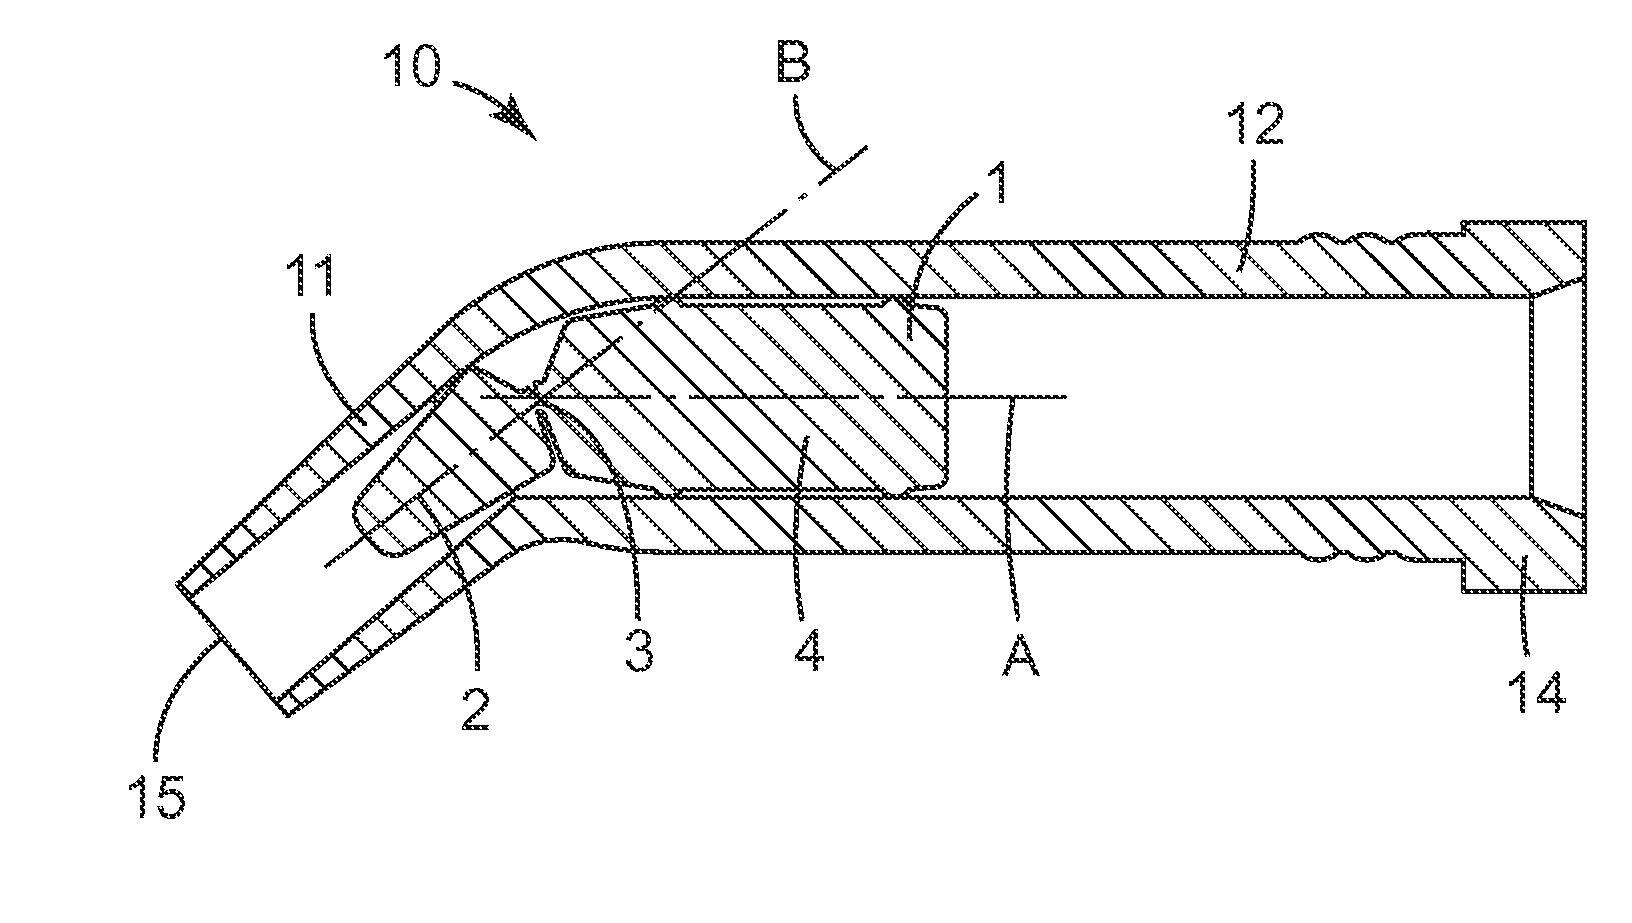 Piston for capsule, method of forming such piston, and capsule therewith